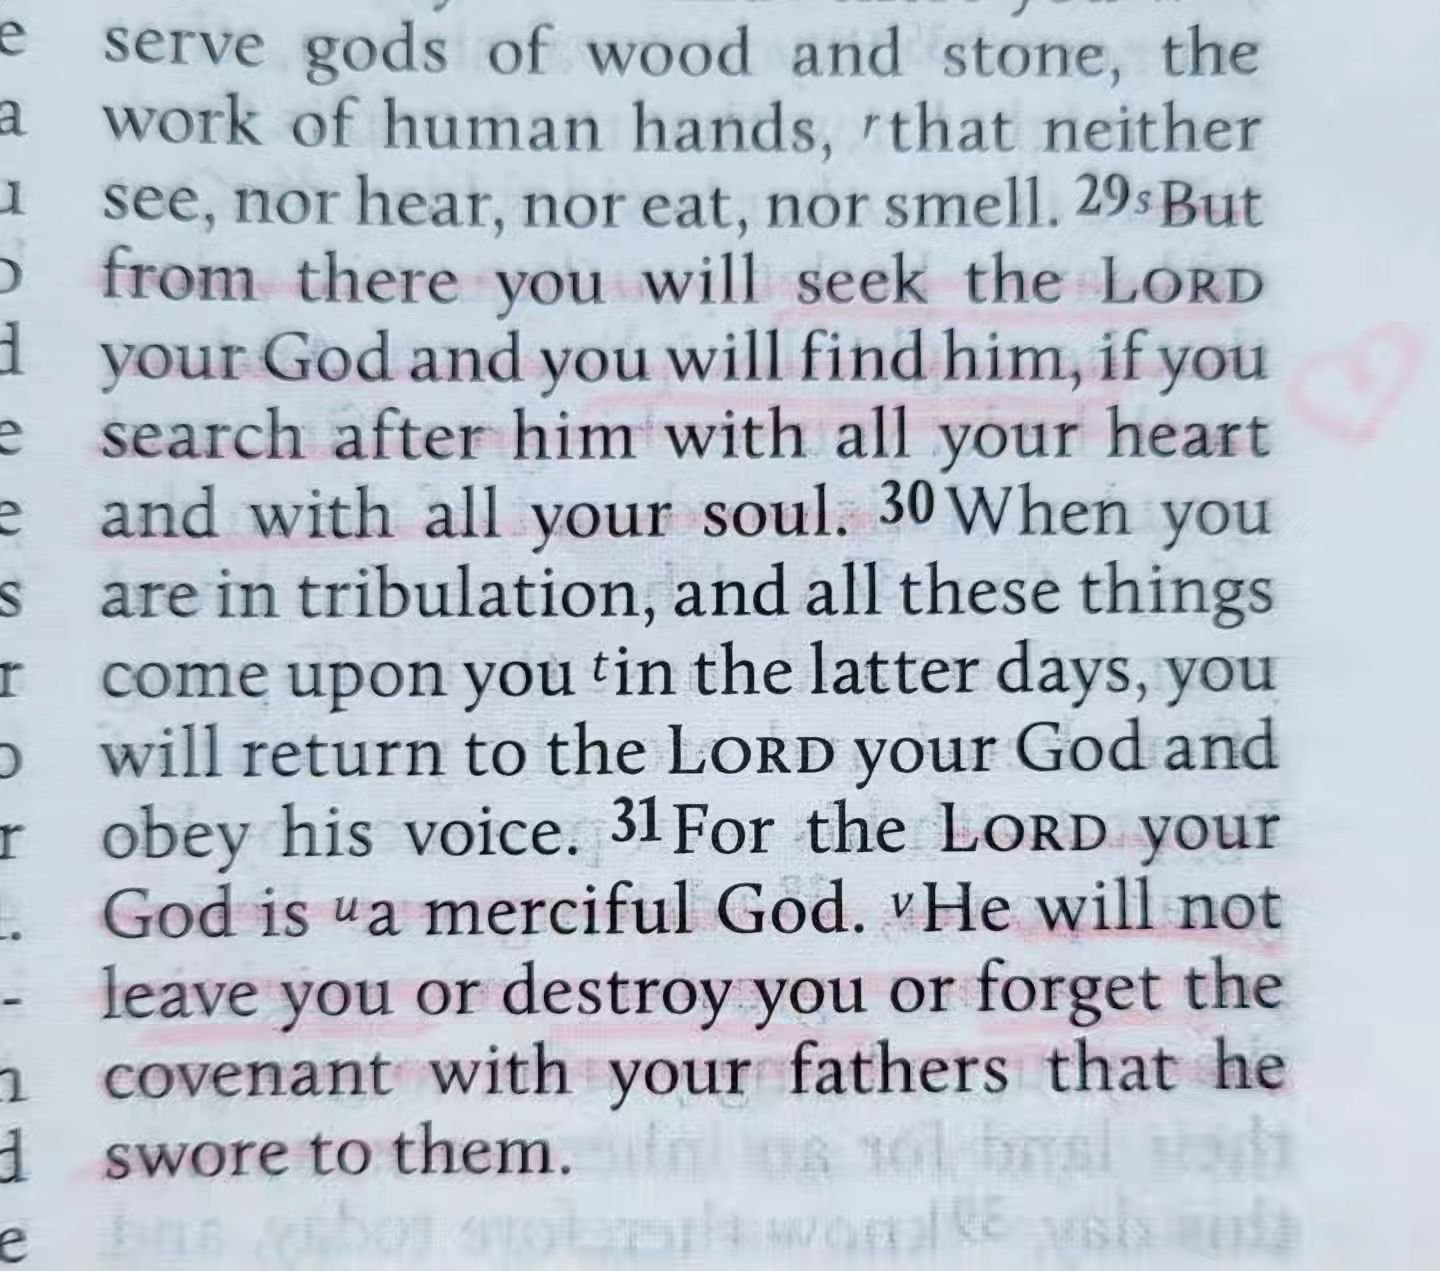 ‭‭Deuteronomy 4:31 ESV‬‬

For the Lord your God is a merciful God. He will not leave you or destroy you or forget the covenant with your fathers that he swore to them.